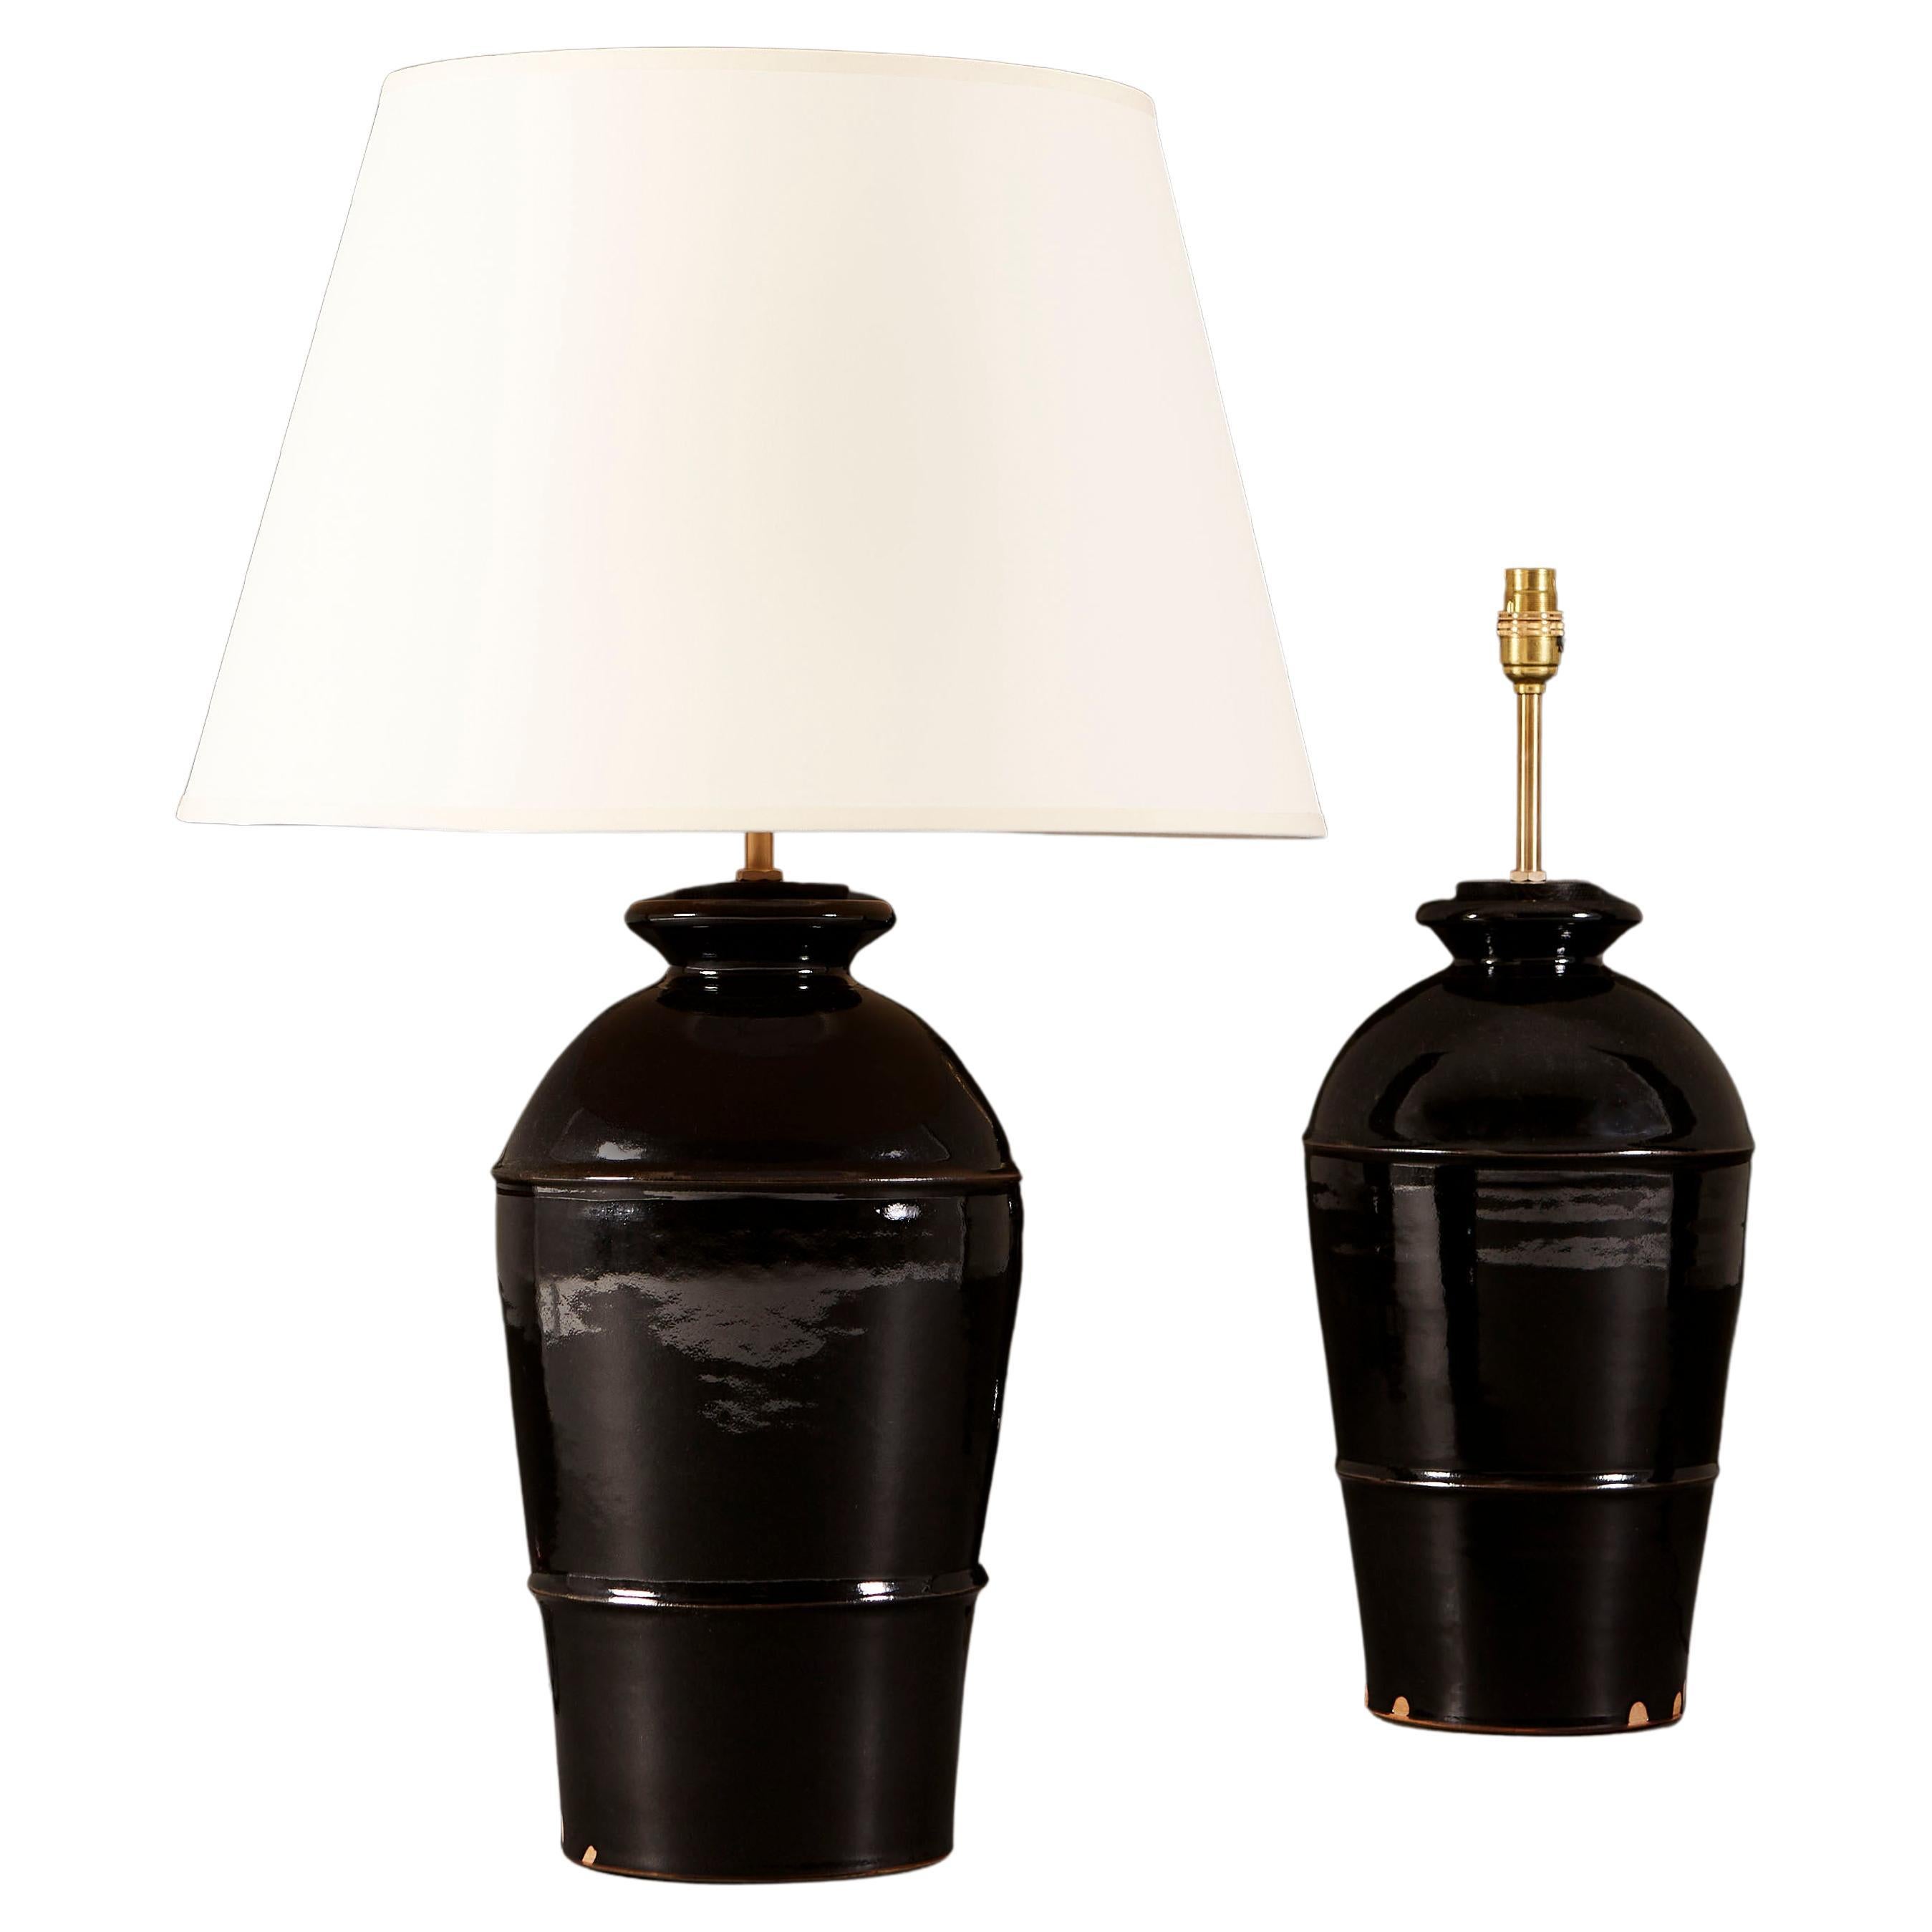 A Pair of Song Dynasty Style Lamps with Tenmoku Glaze For Sale